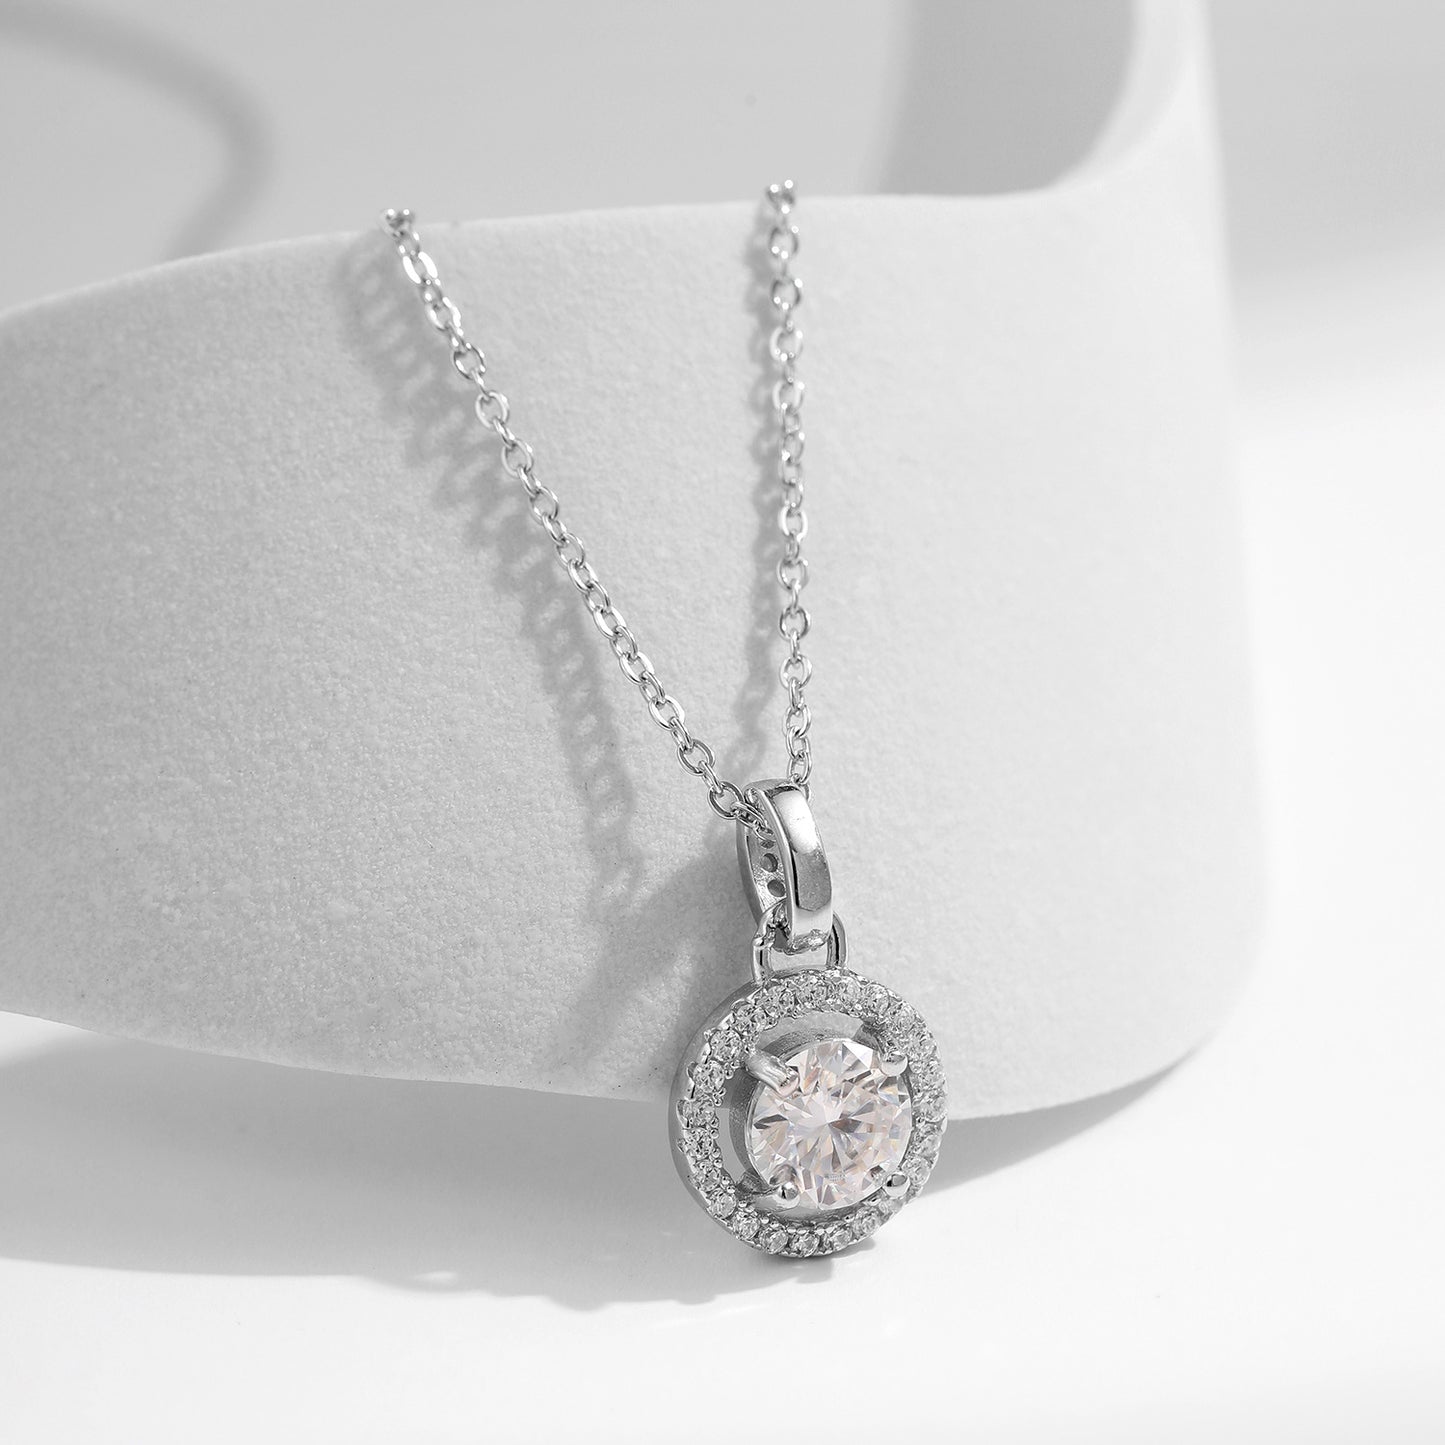 Luxurious French Pendant Necklace with 1 Carat Moissanite in Sterling Silver